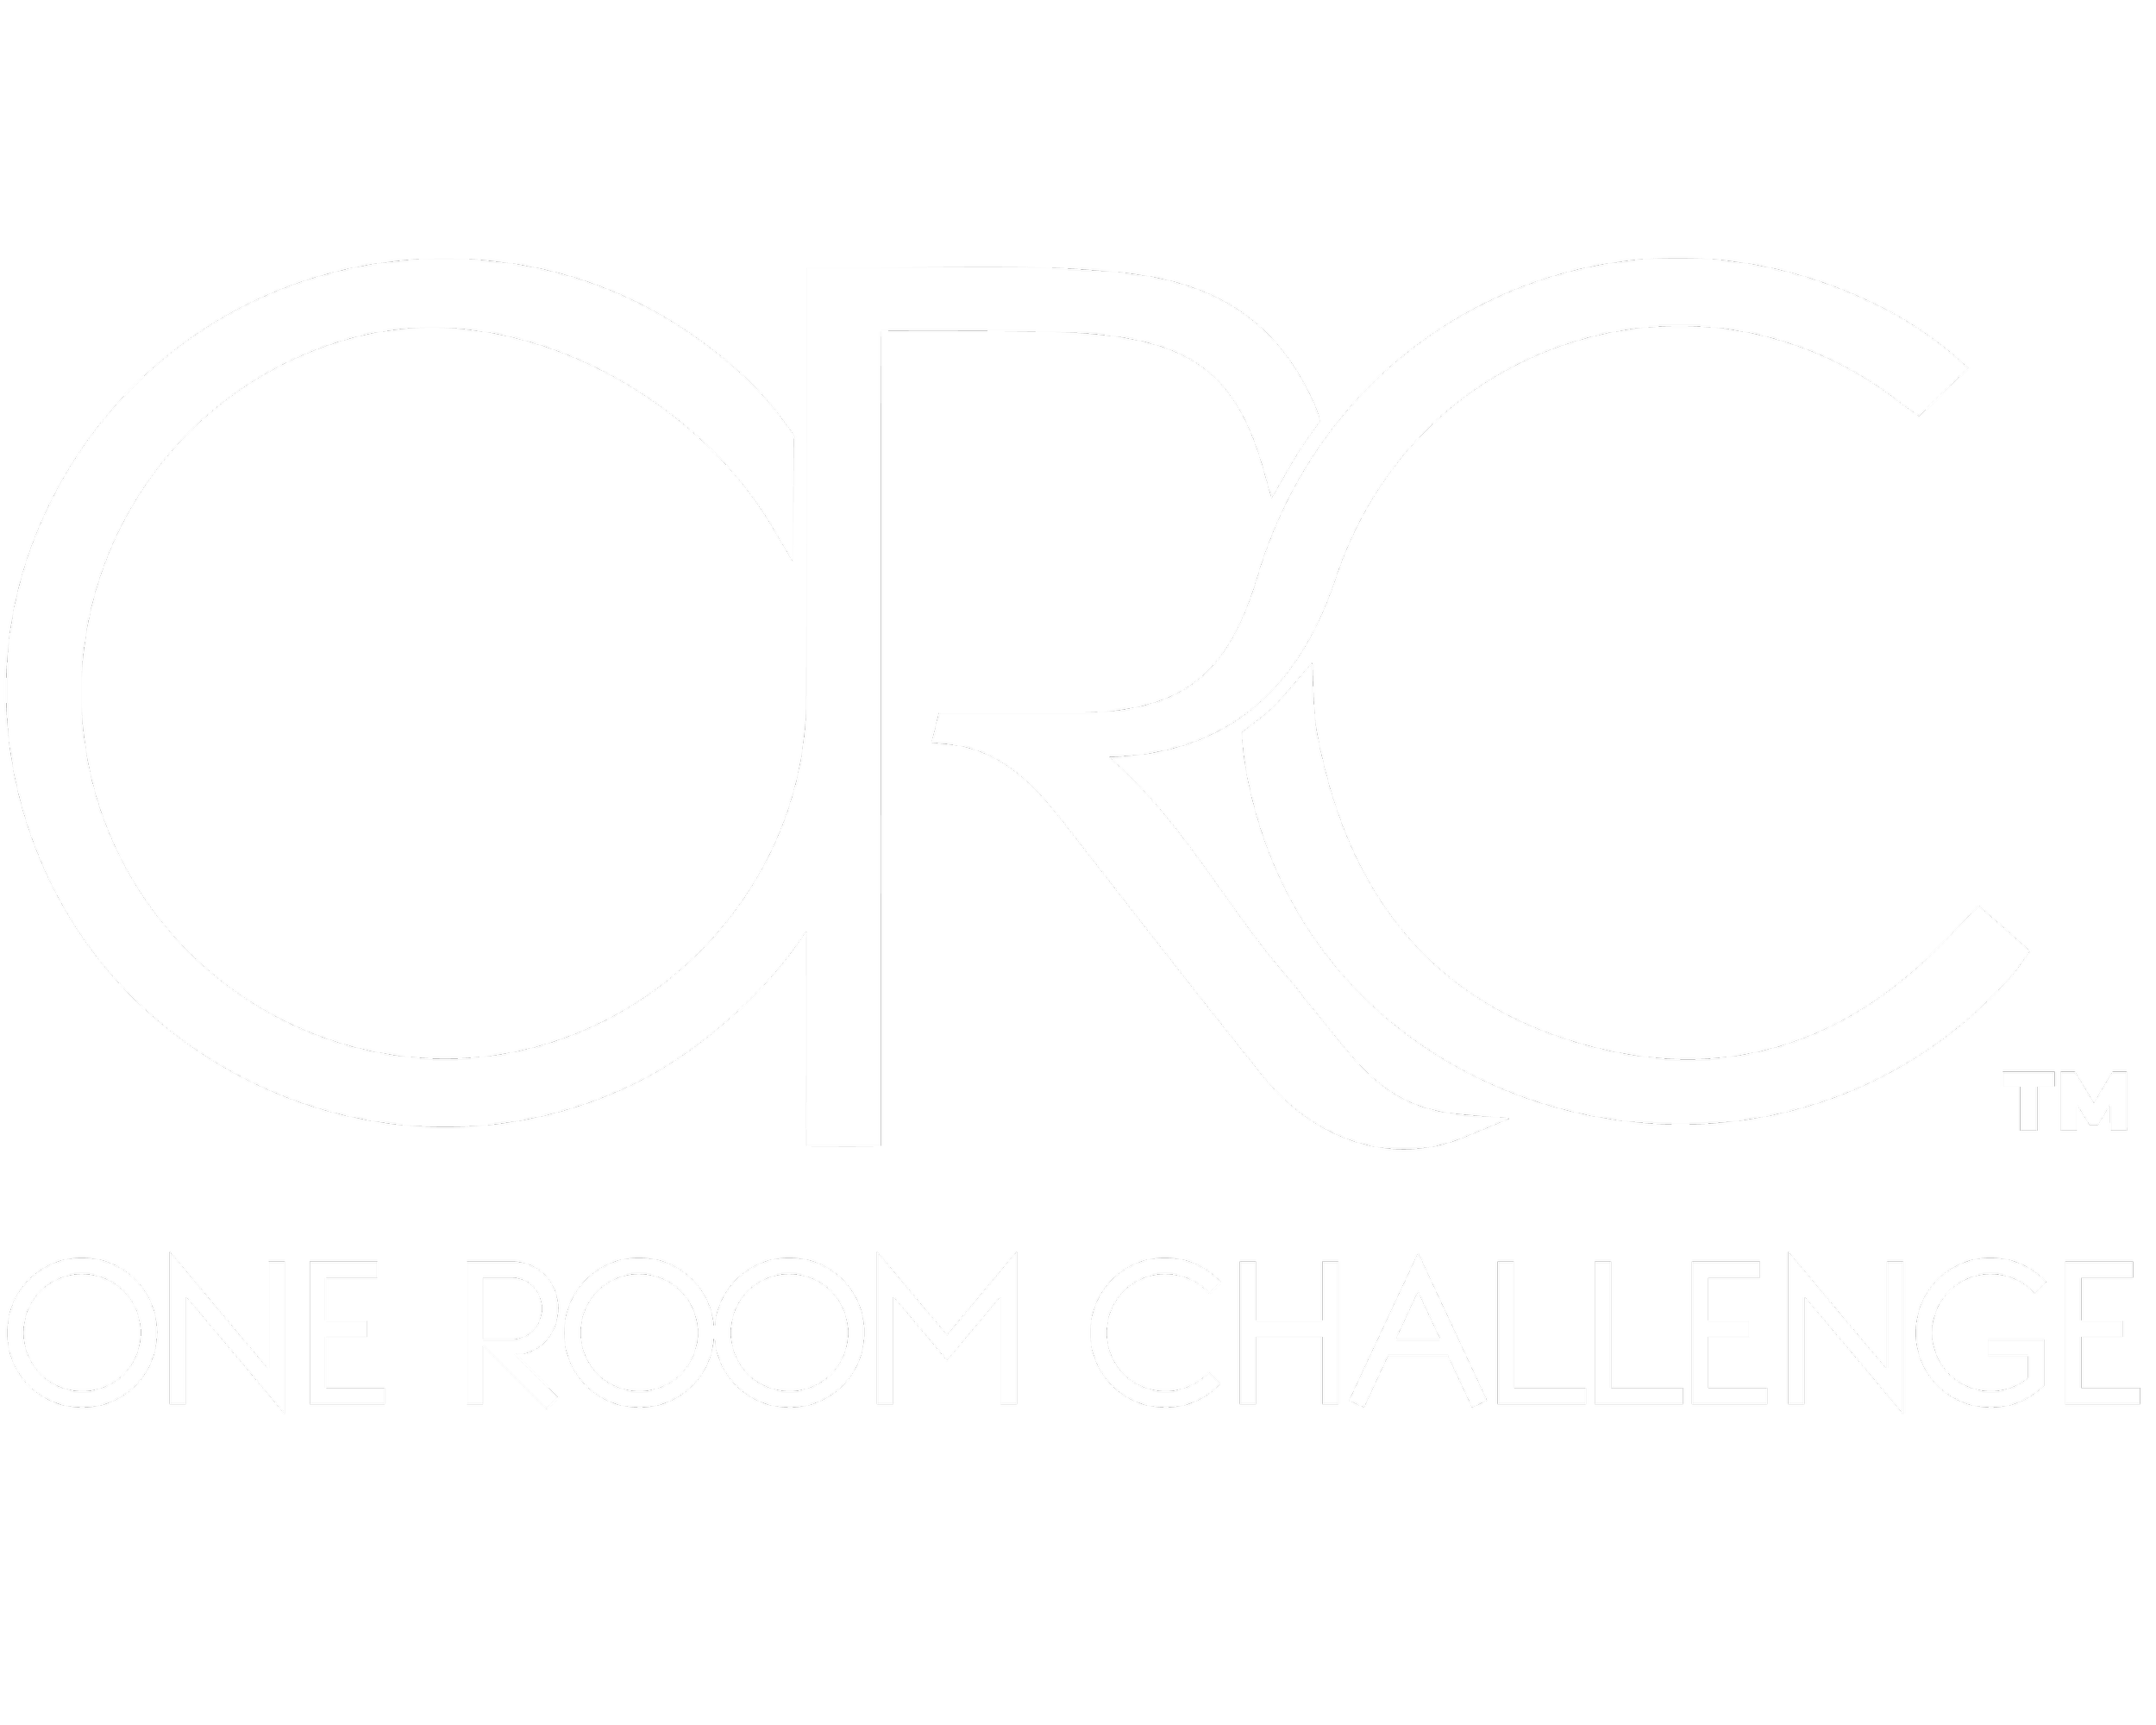 ORC LOGO 24-05.png